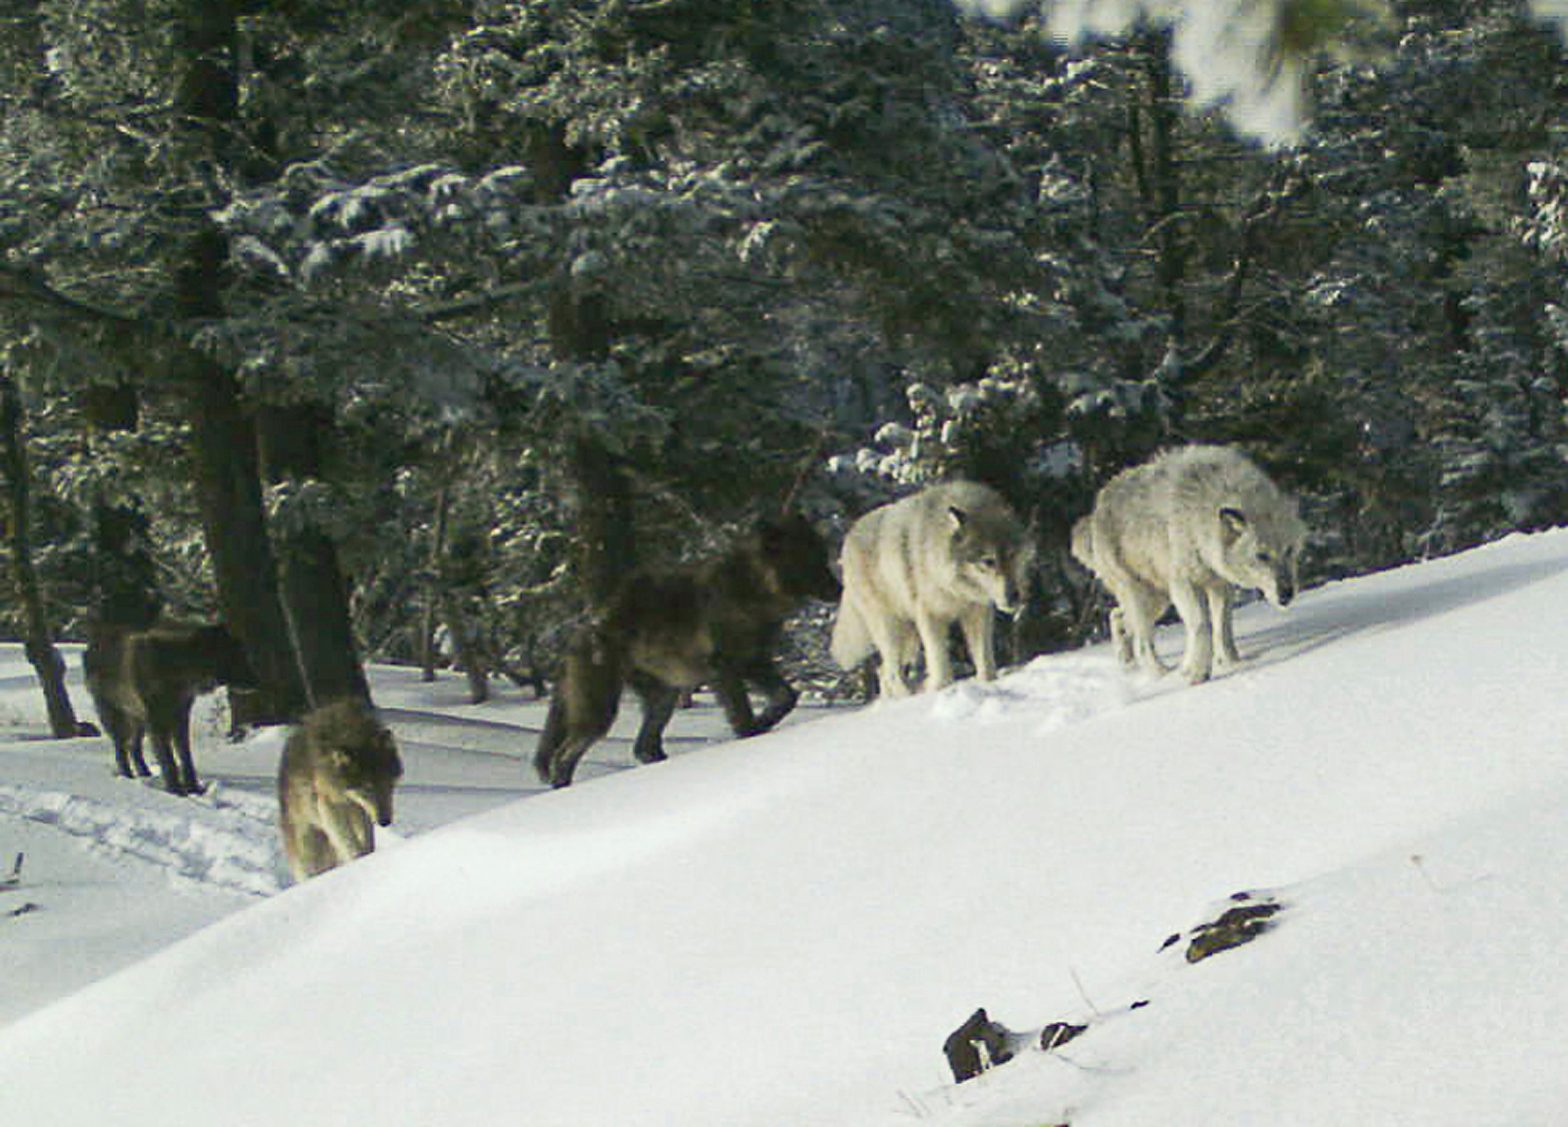 Greater Protections Sought for Gray Wolves